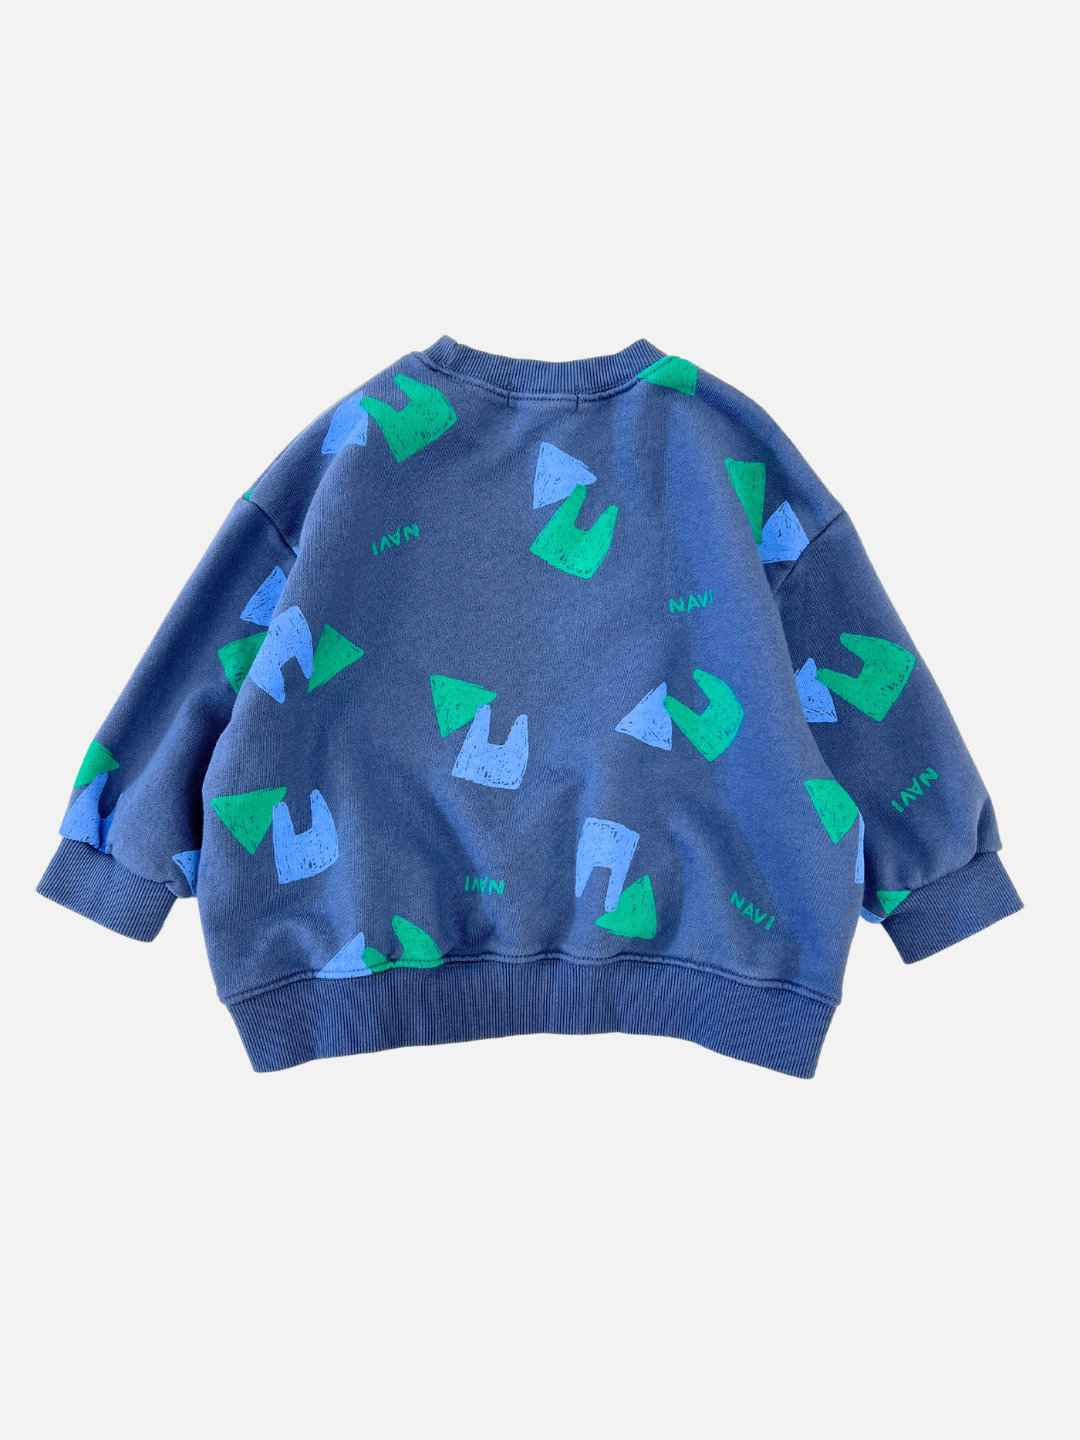 Vintage Blue | Back view of kids blue crewneck sweatshirt with an all over pattern of green and blue shapes and the brand name Navi.